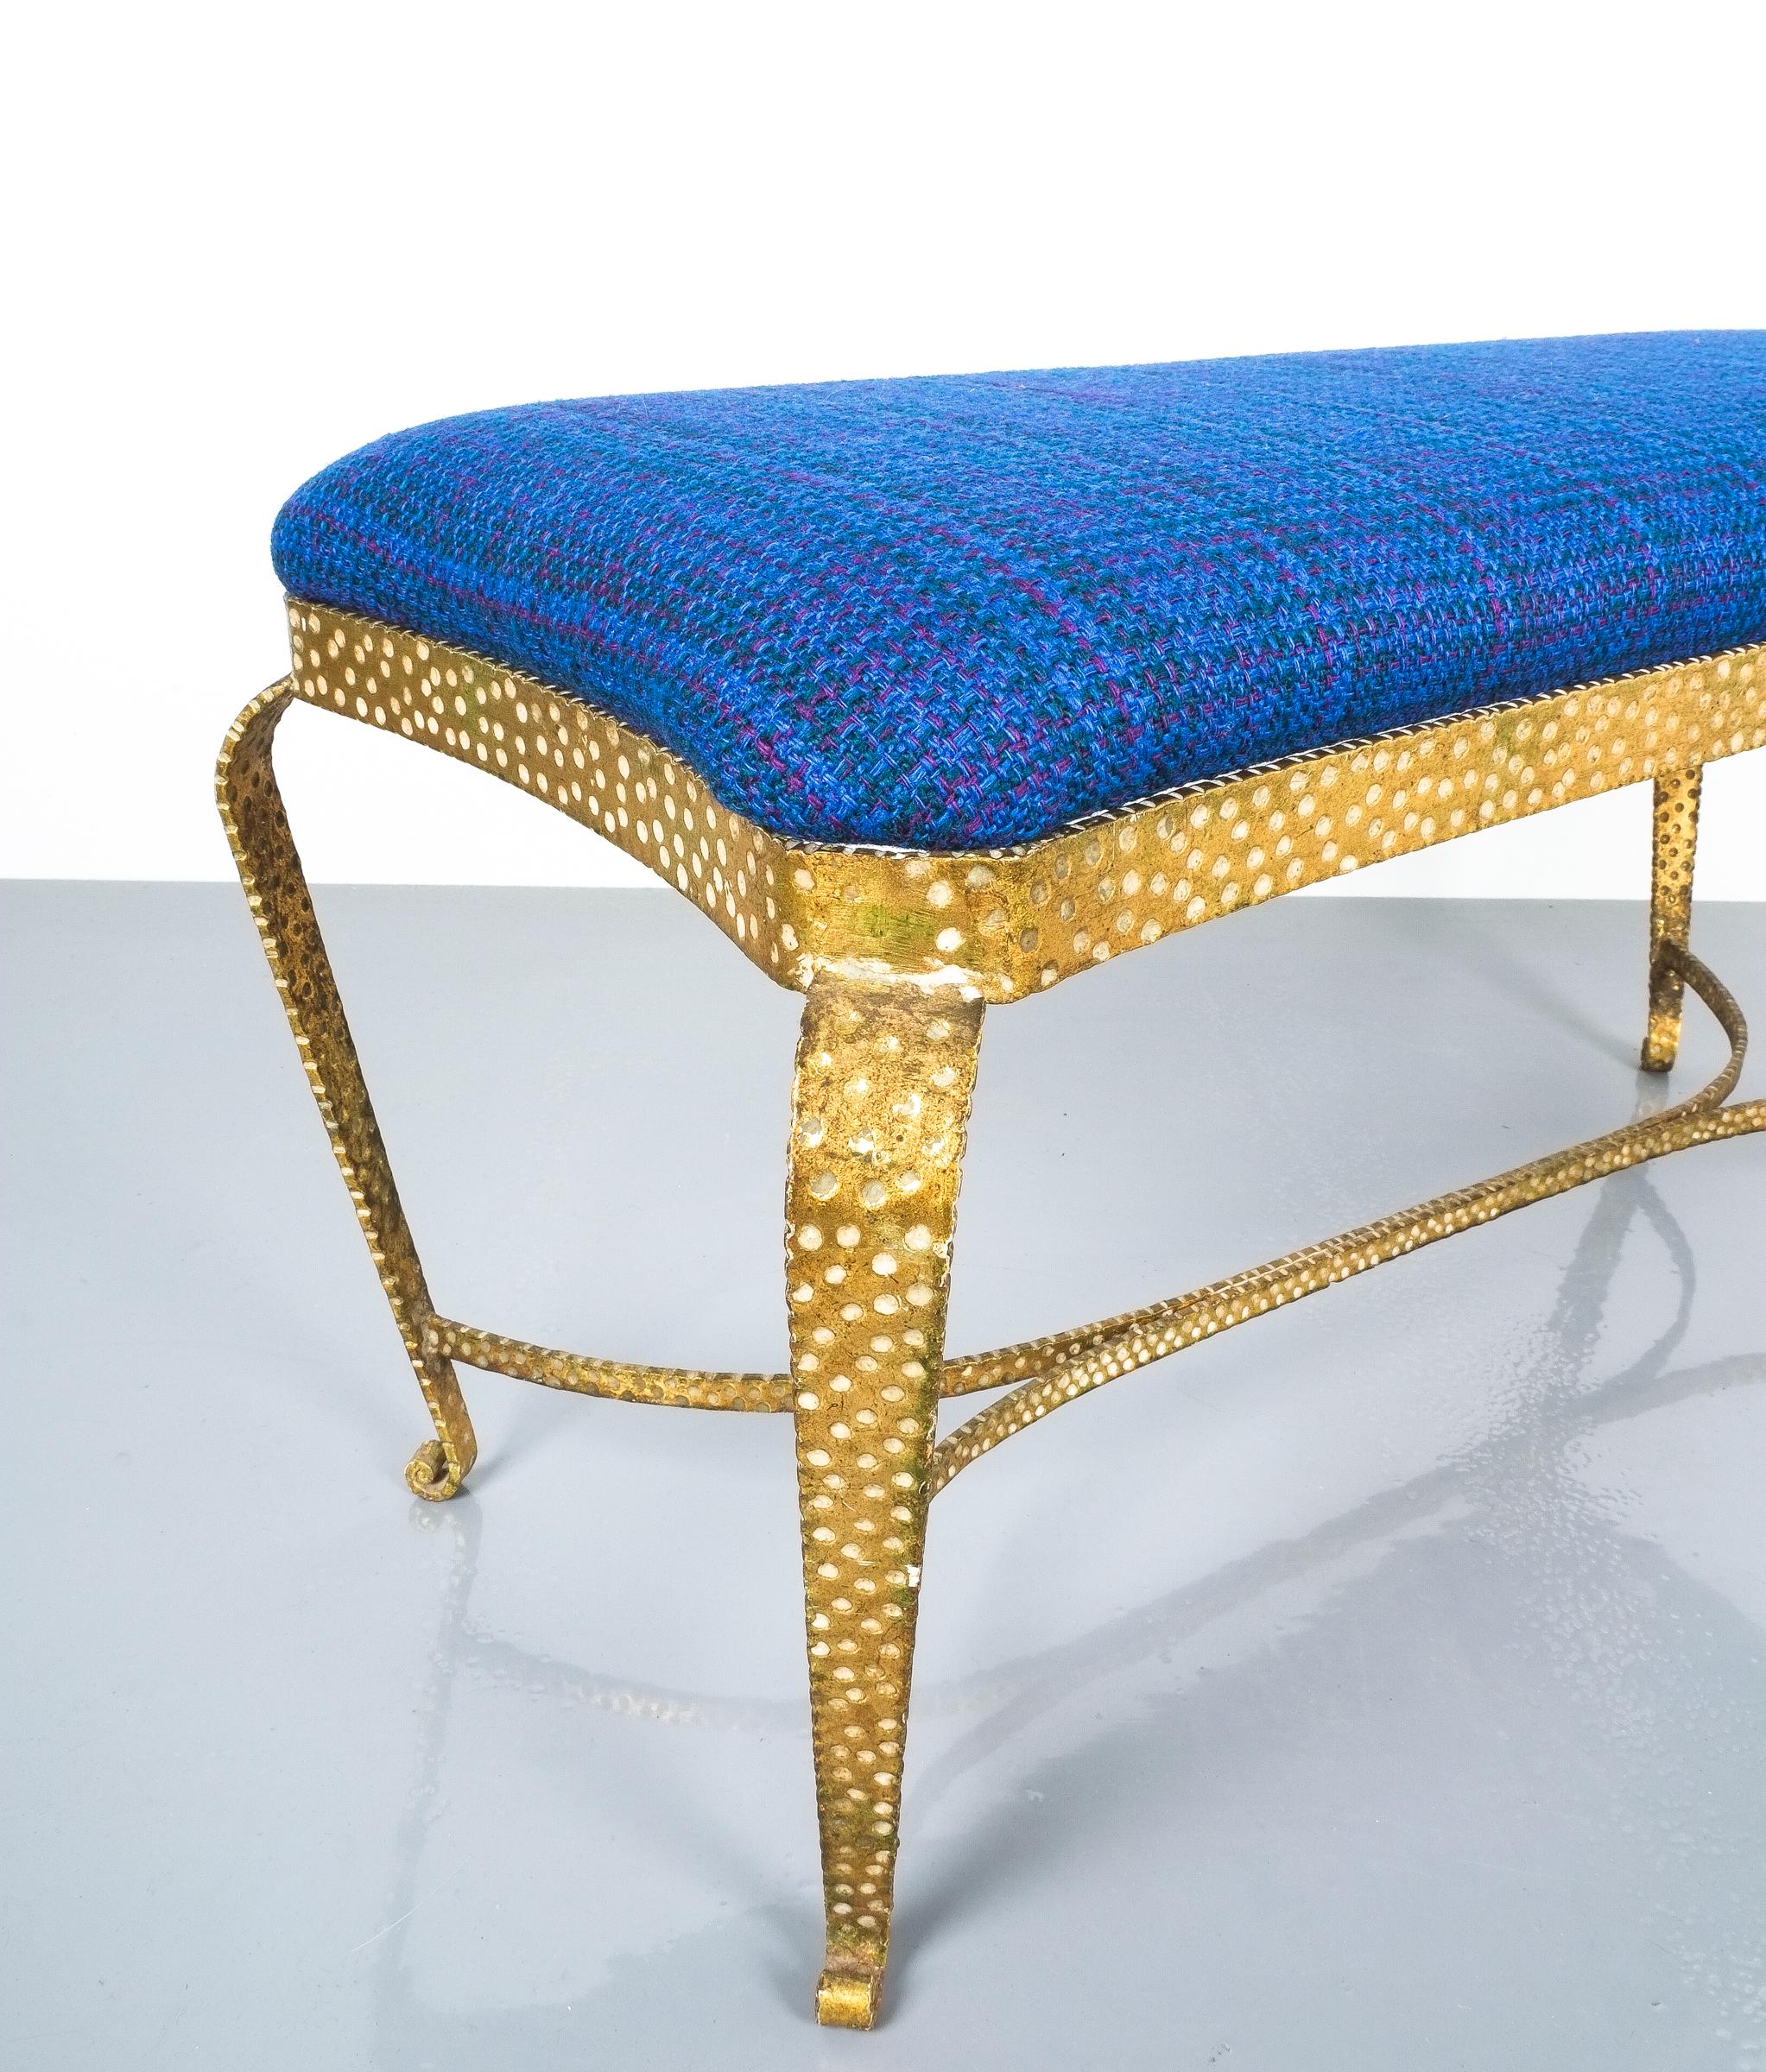 Large Gold Pier Luigi Colli Iron Bedroom Bench in Blue Fabric, Italy, 1950 1